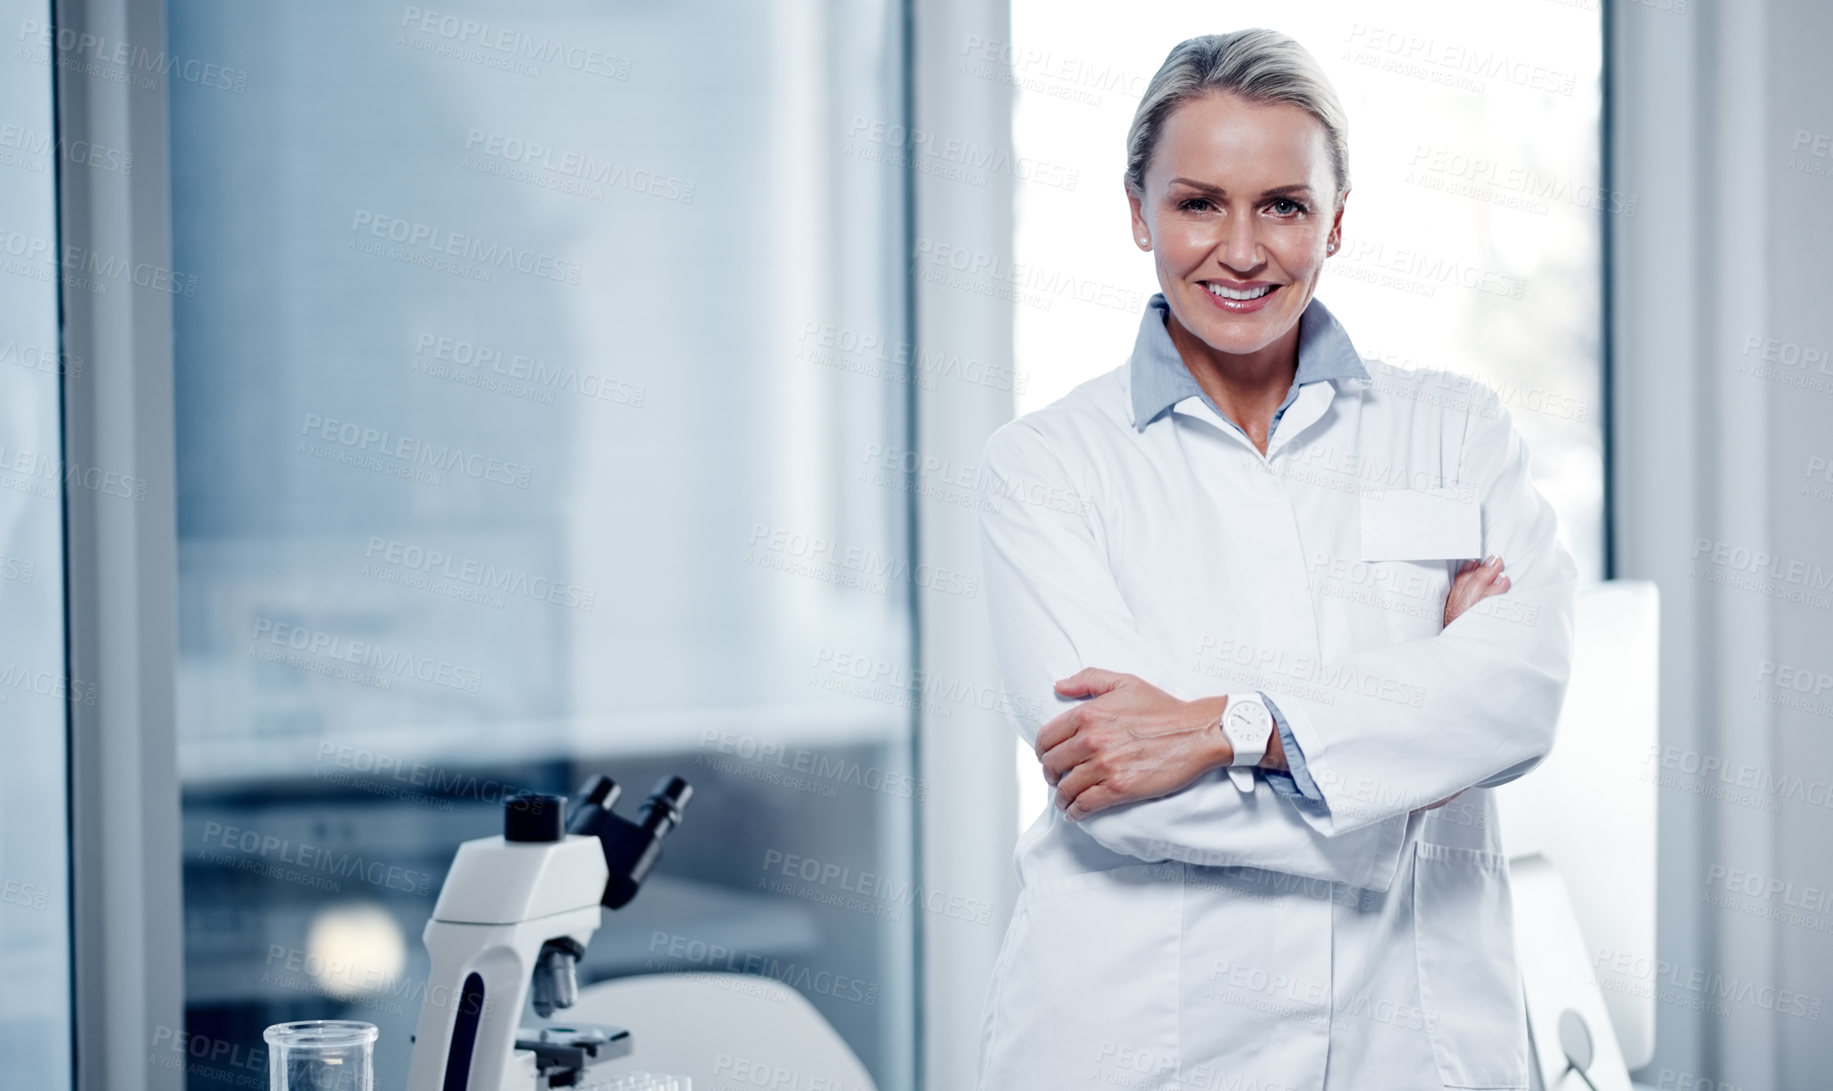 Buy stock photo Portrait of a mature scientist standing in a lab